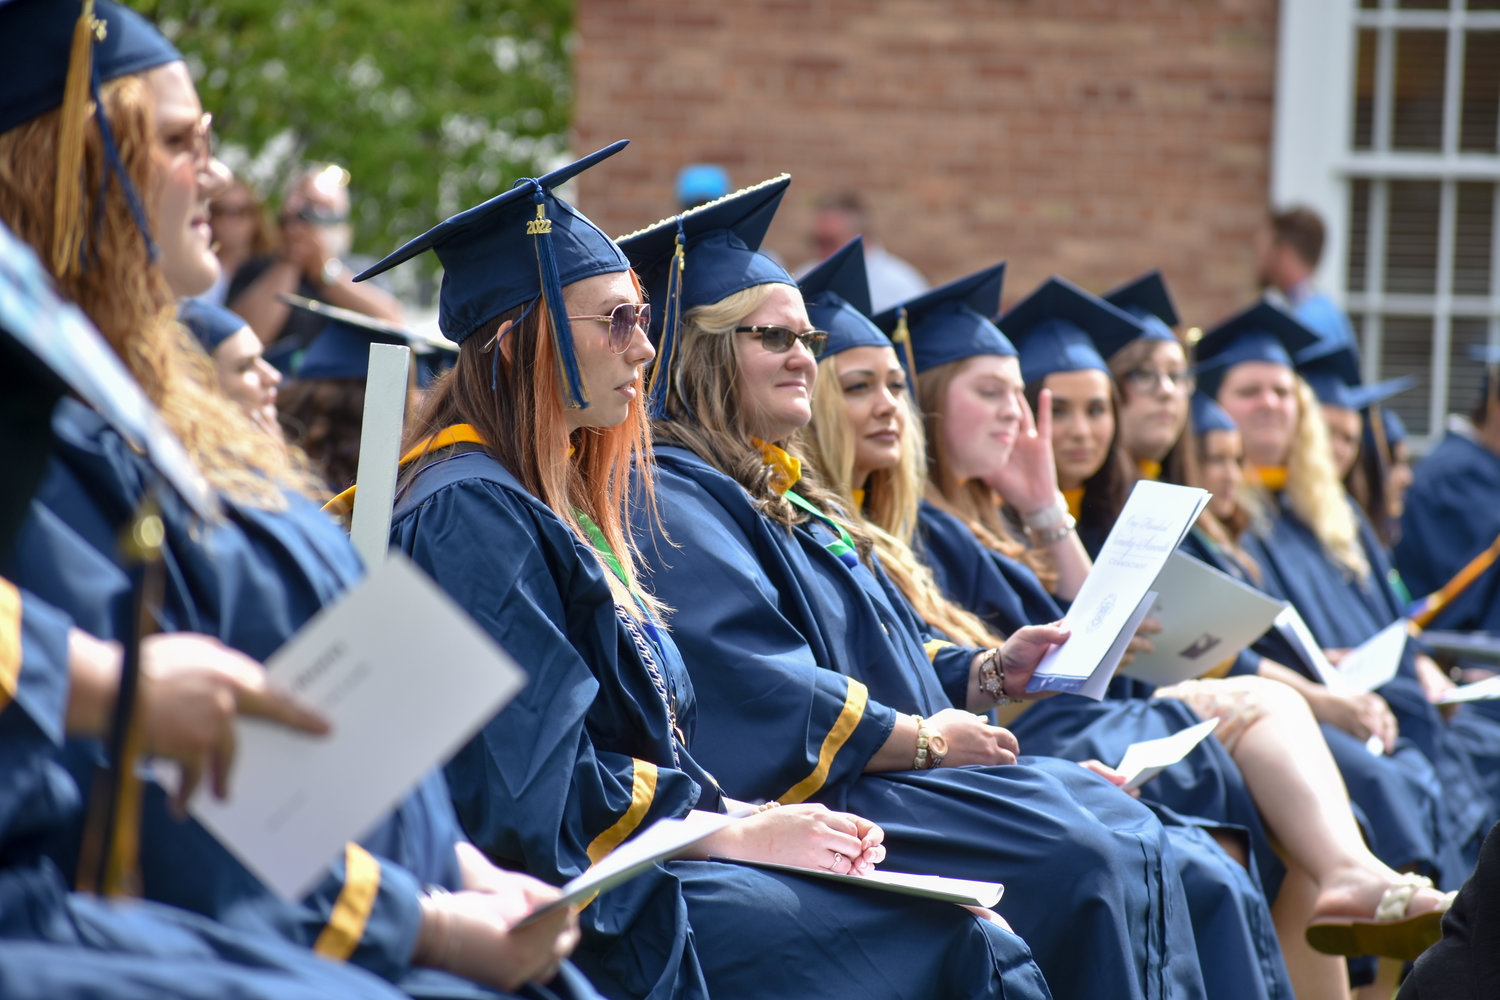 Students participate in Cazenovia College Commencement Ceremony in May 2022.